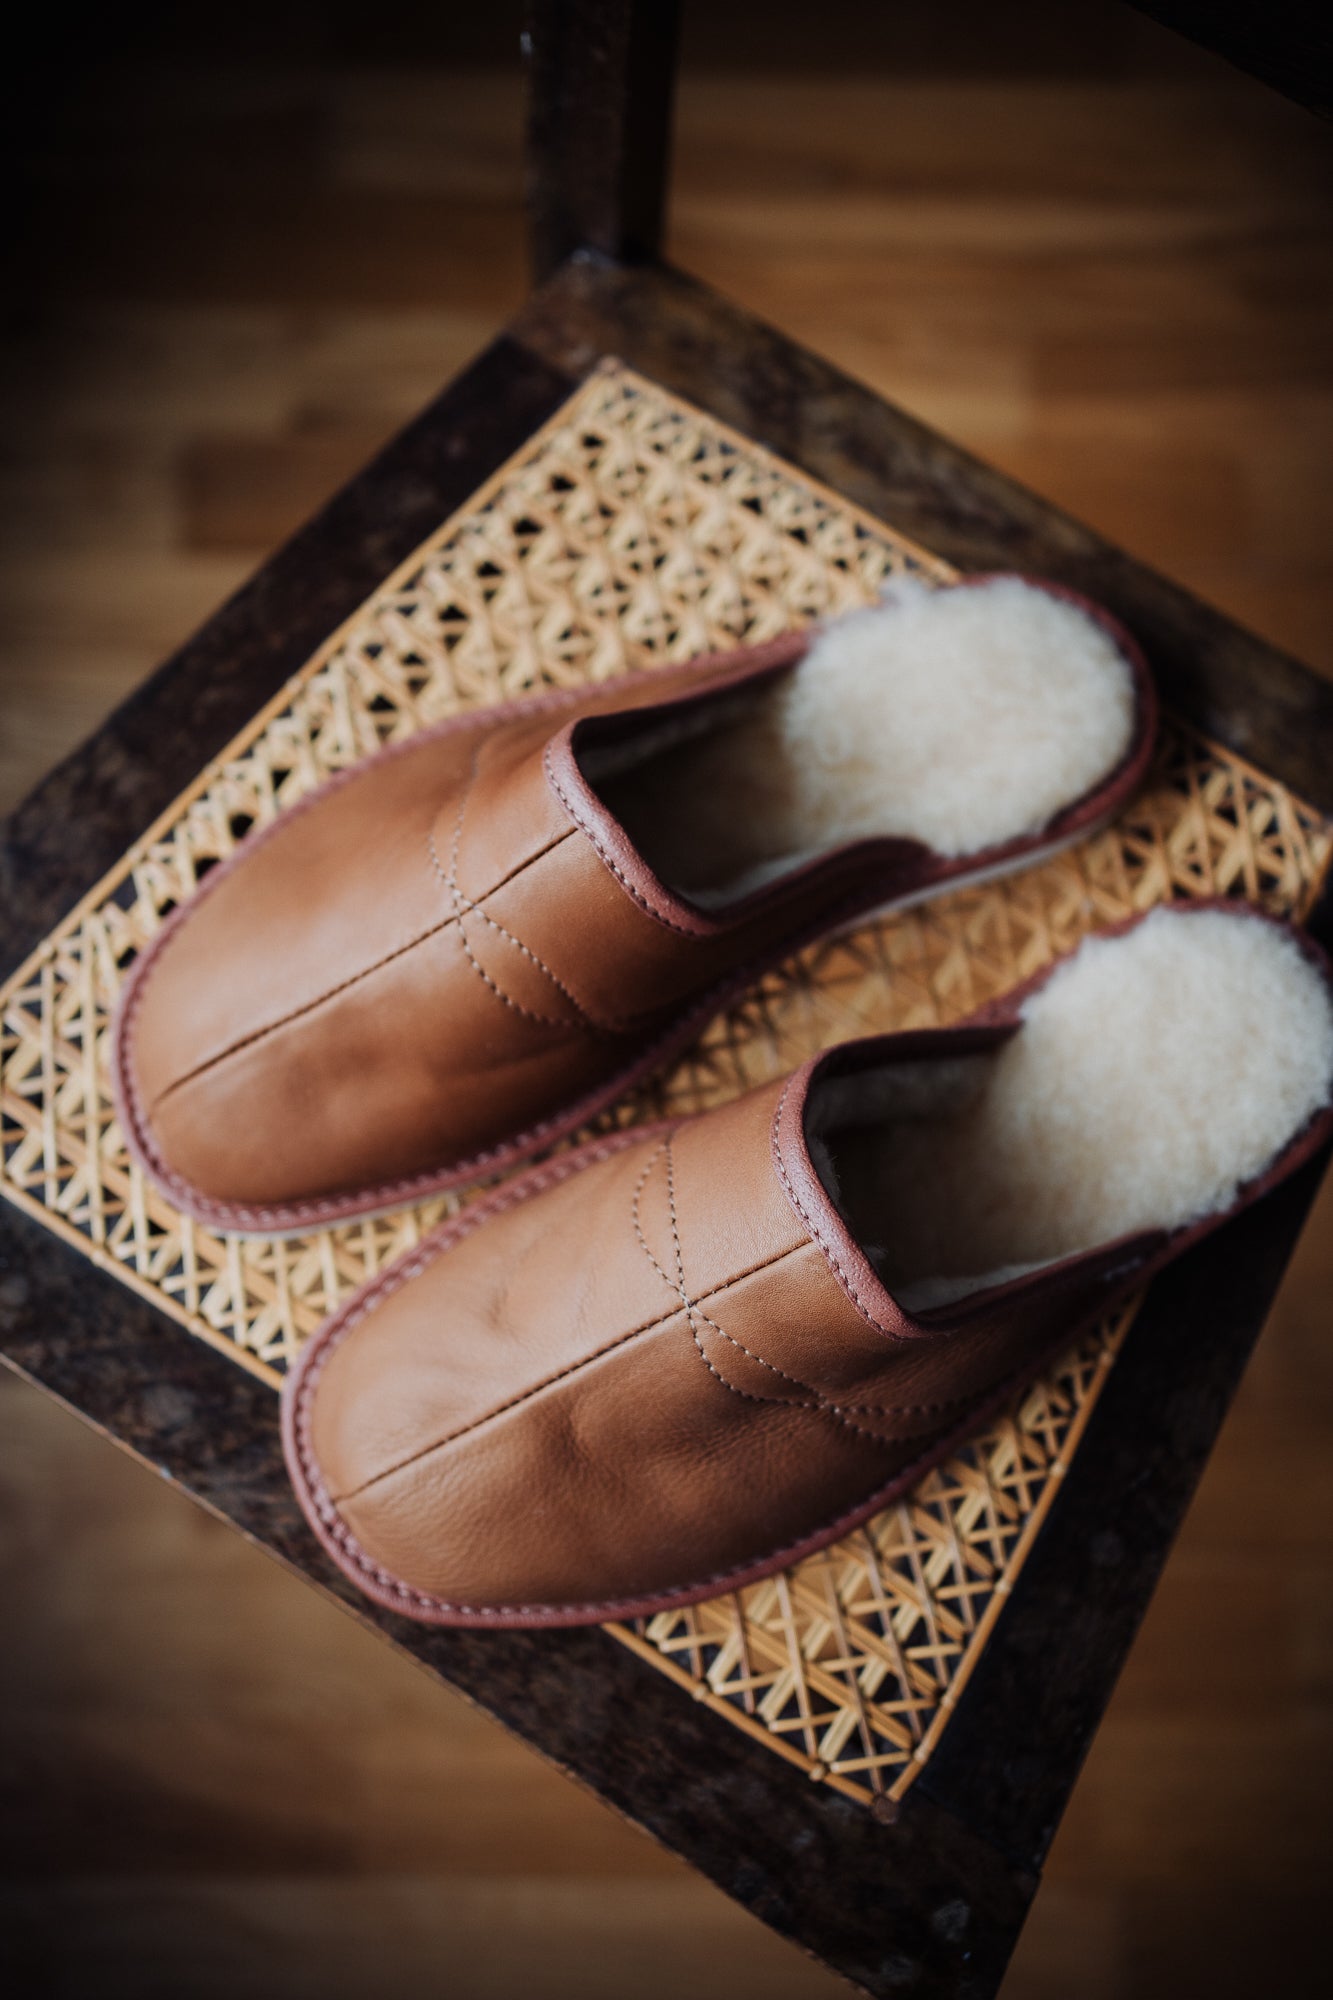 Soft men's leather slippers with cream wool lining, elegantly displayed on a nice chair.